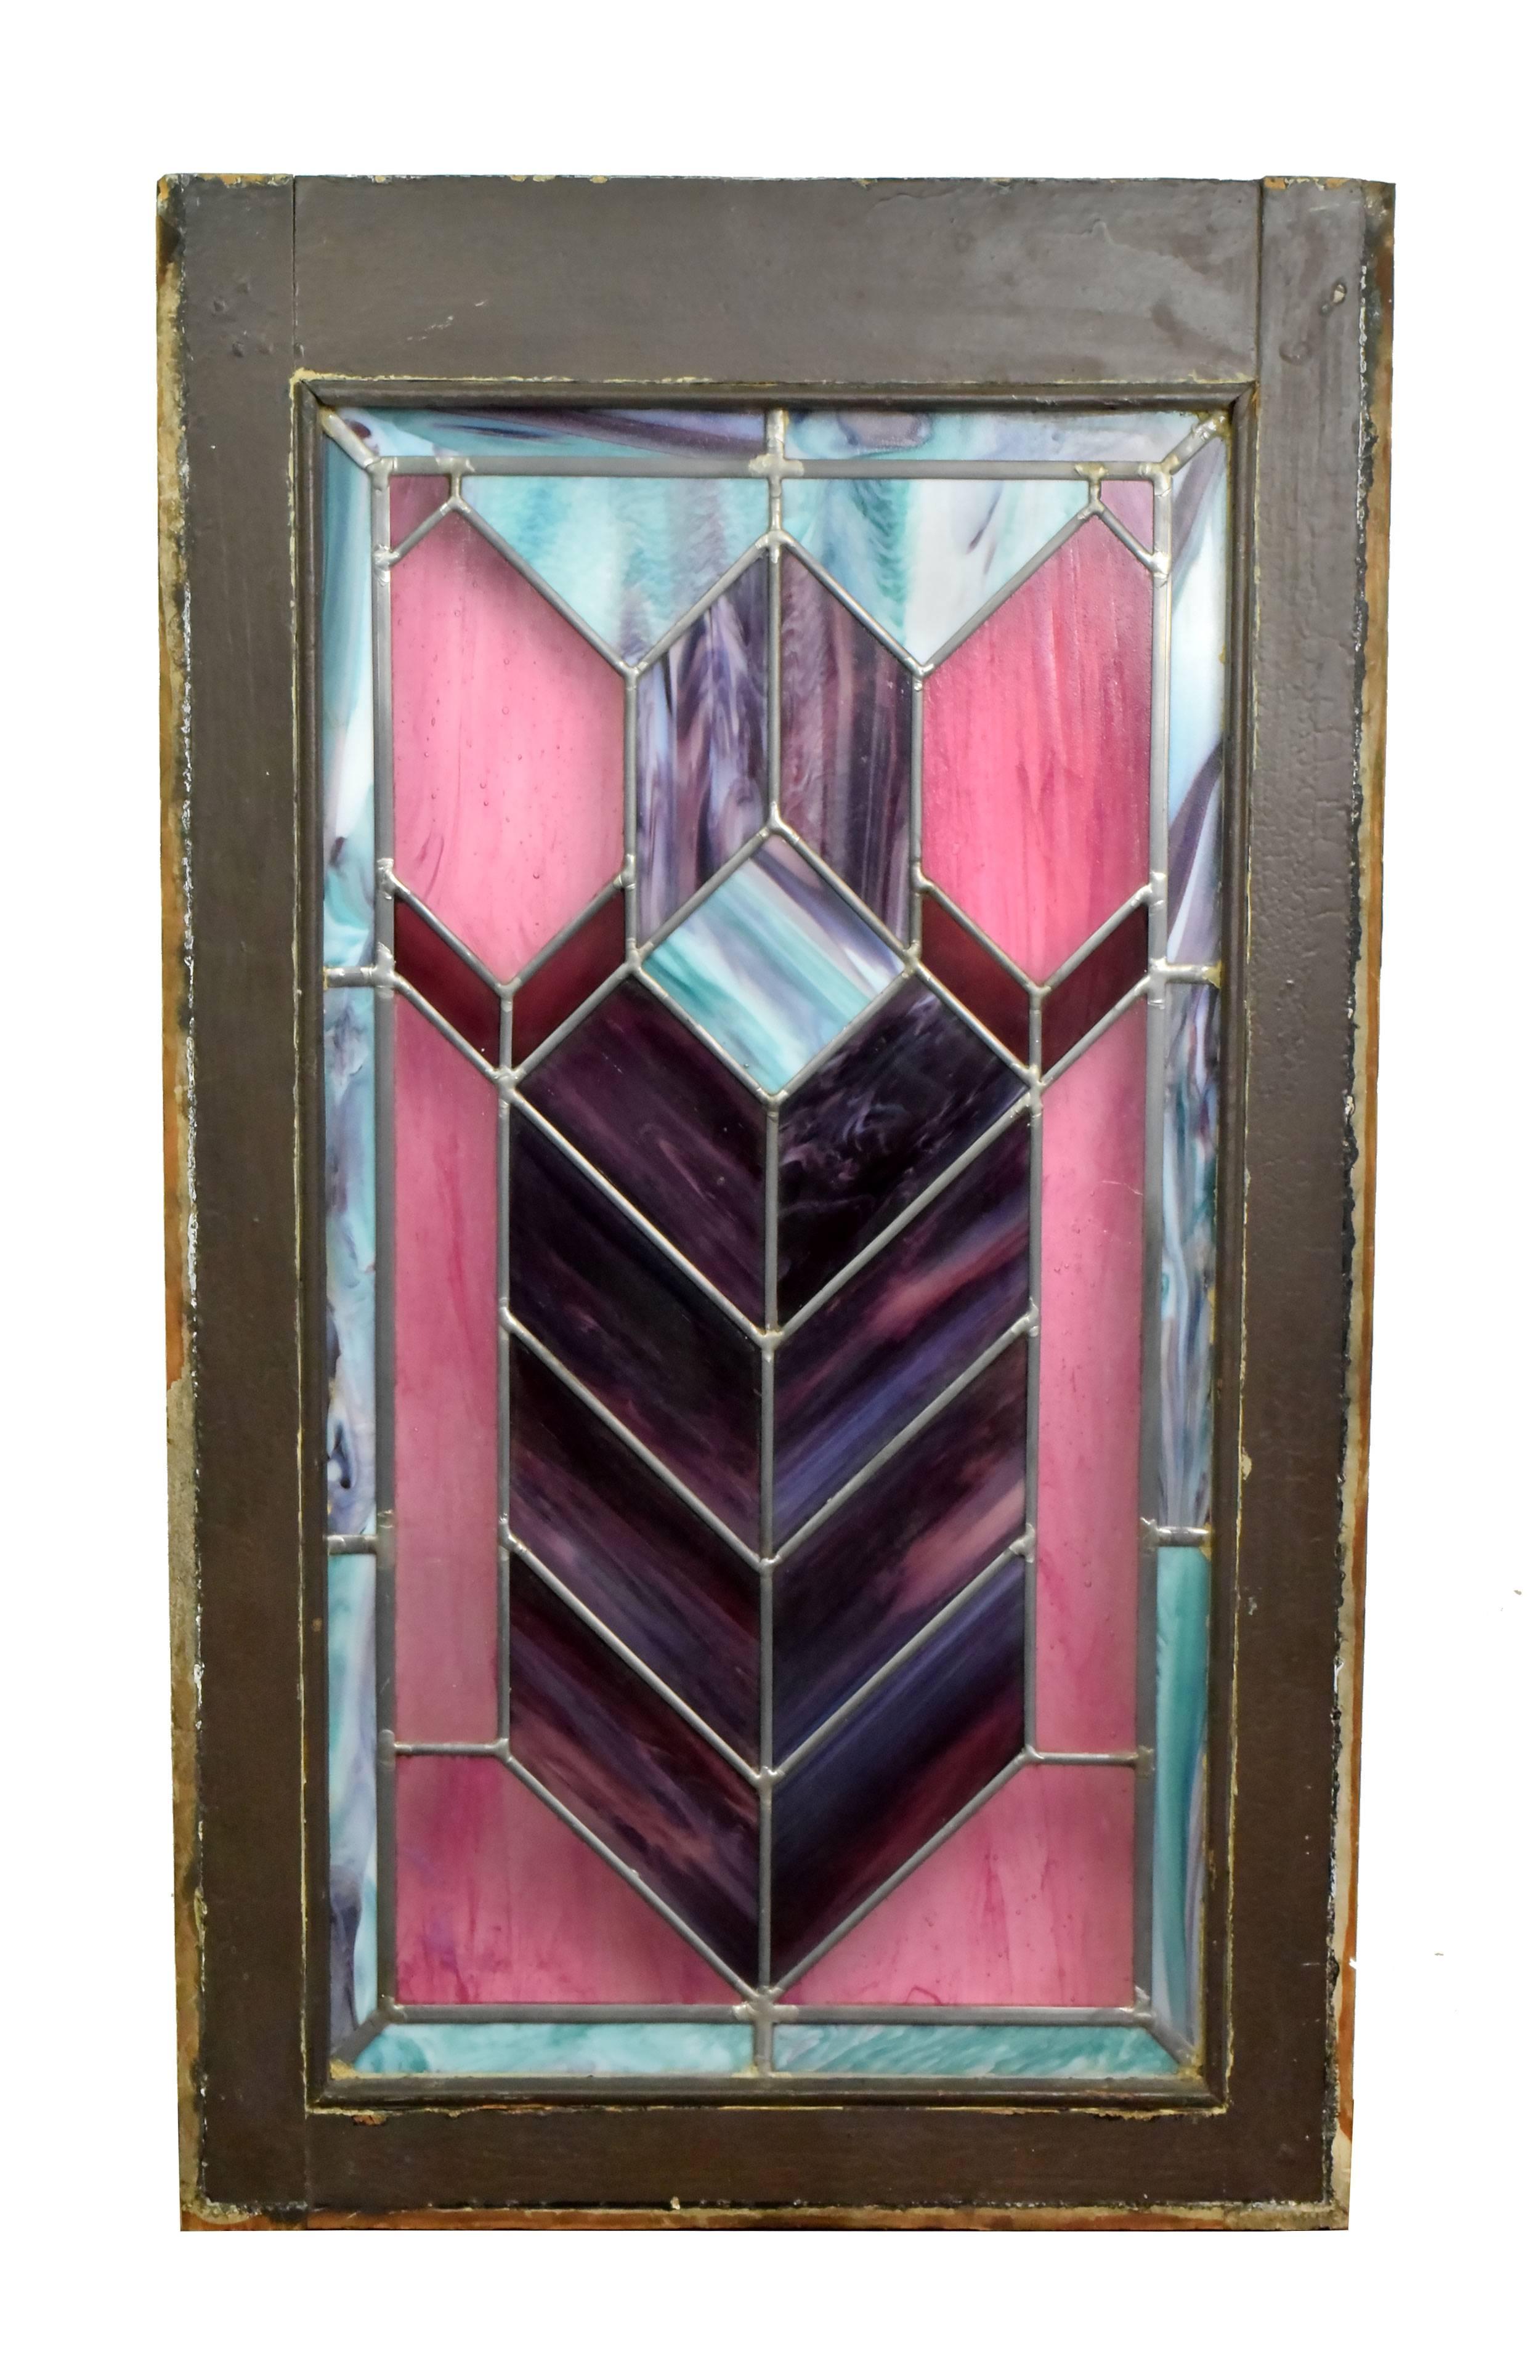 This gorgeous Prairie style stained glass window features purple, pink, and blue-green panels that make up a Classic chevron design. The wood frame is painted dark brown on one side and left unfinished on the other. This would make a great stand